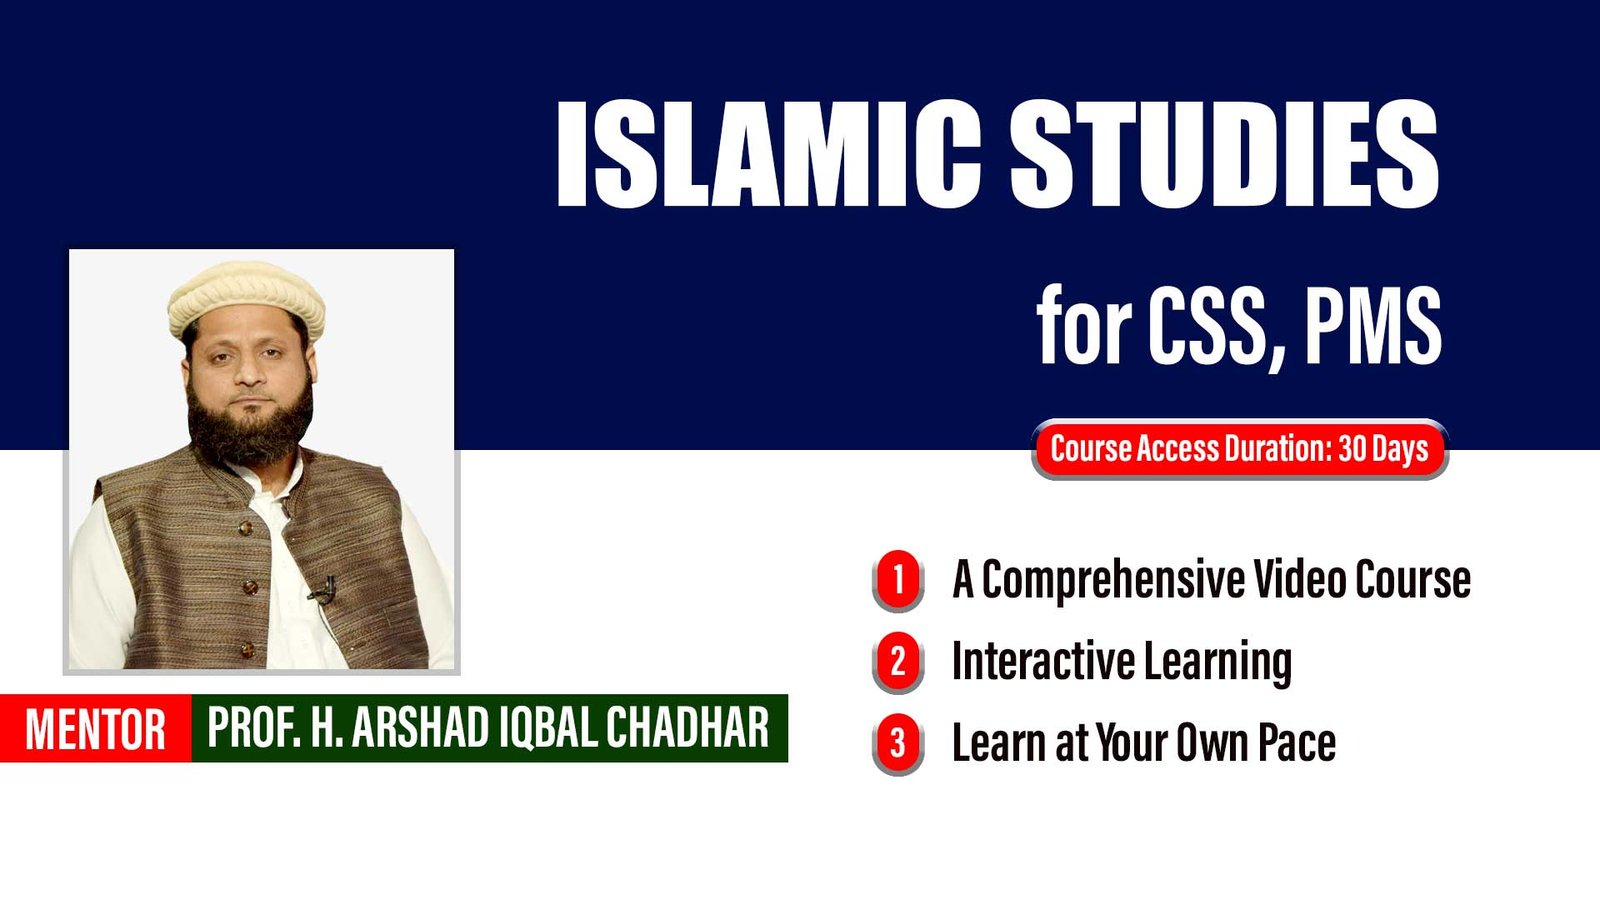 Islamic Studies for CSS, PMS Video Course by Prof. Hafiz Arshad Iqbal Chadhar